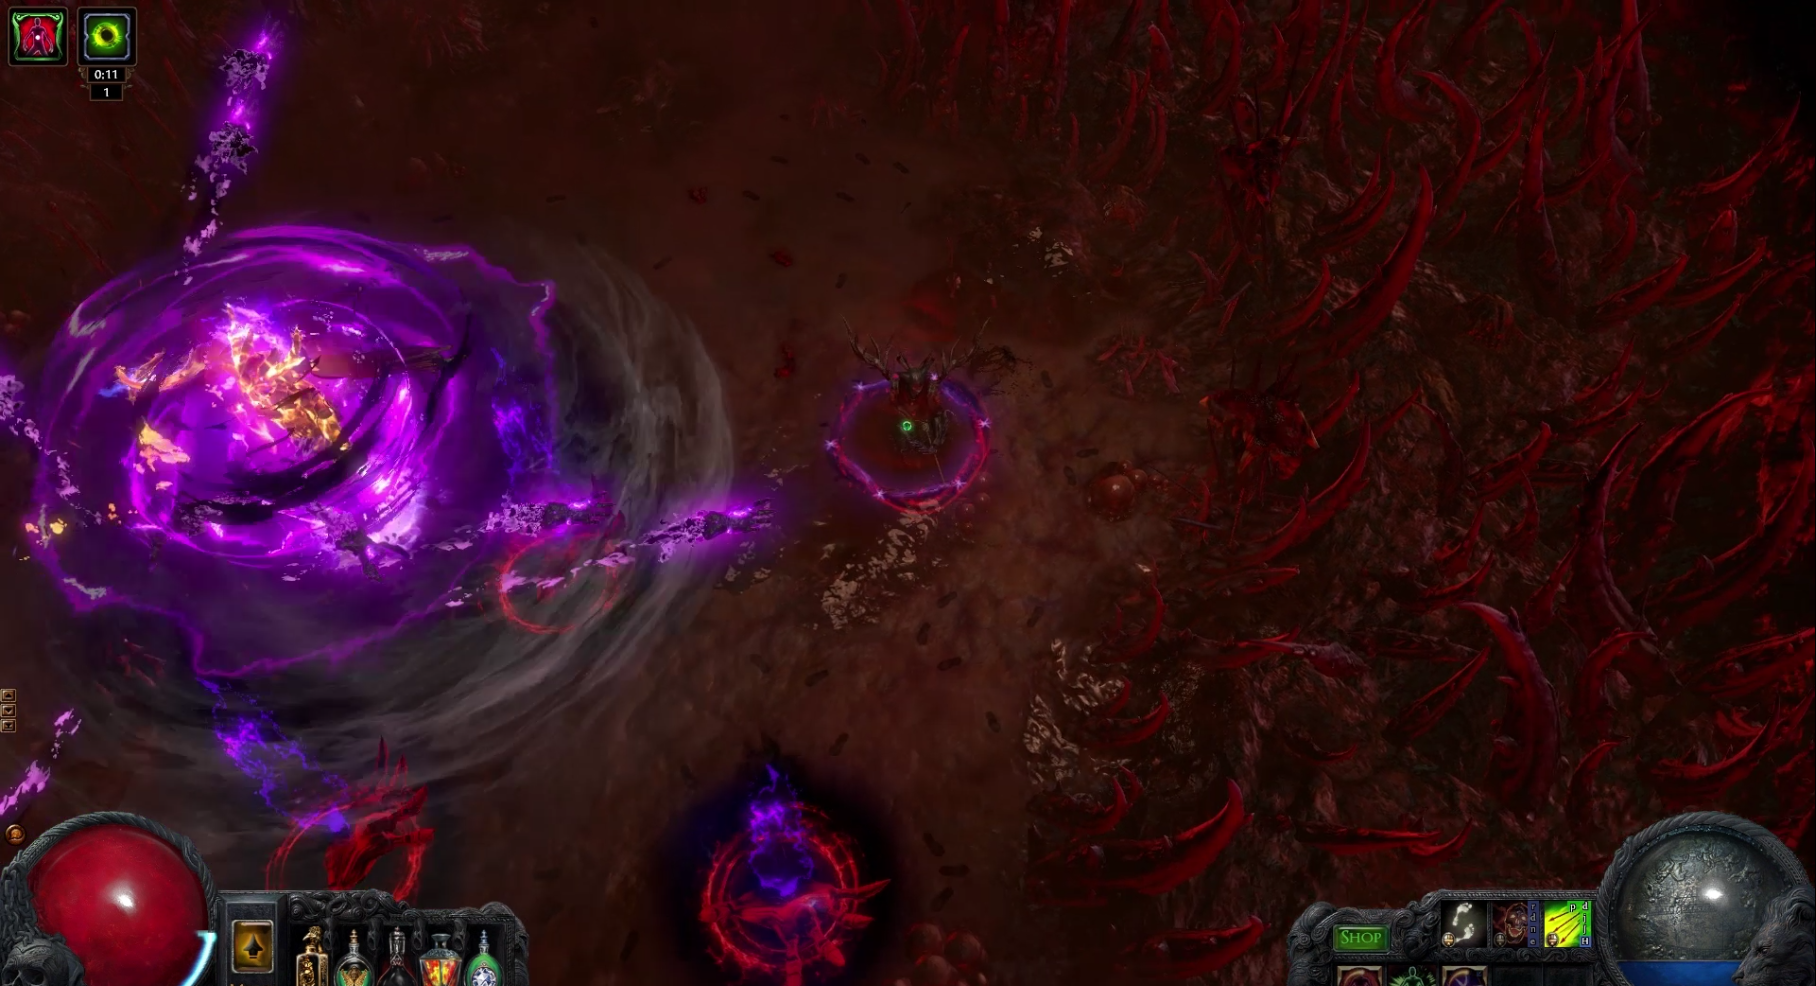 Breachlords boss fight screenshot from Path of Exile